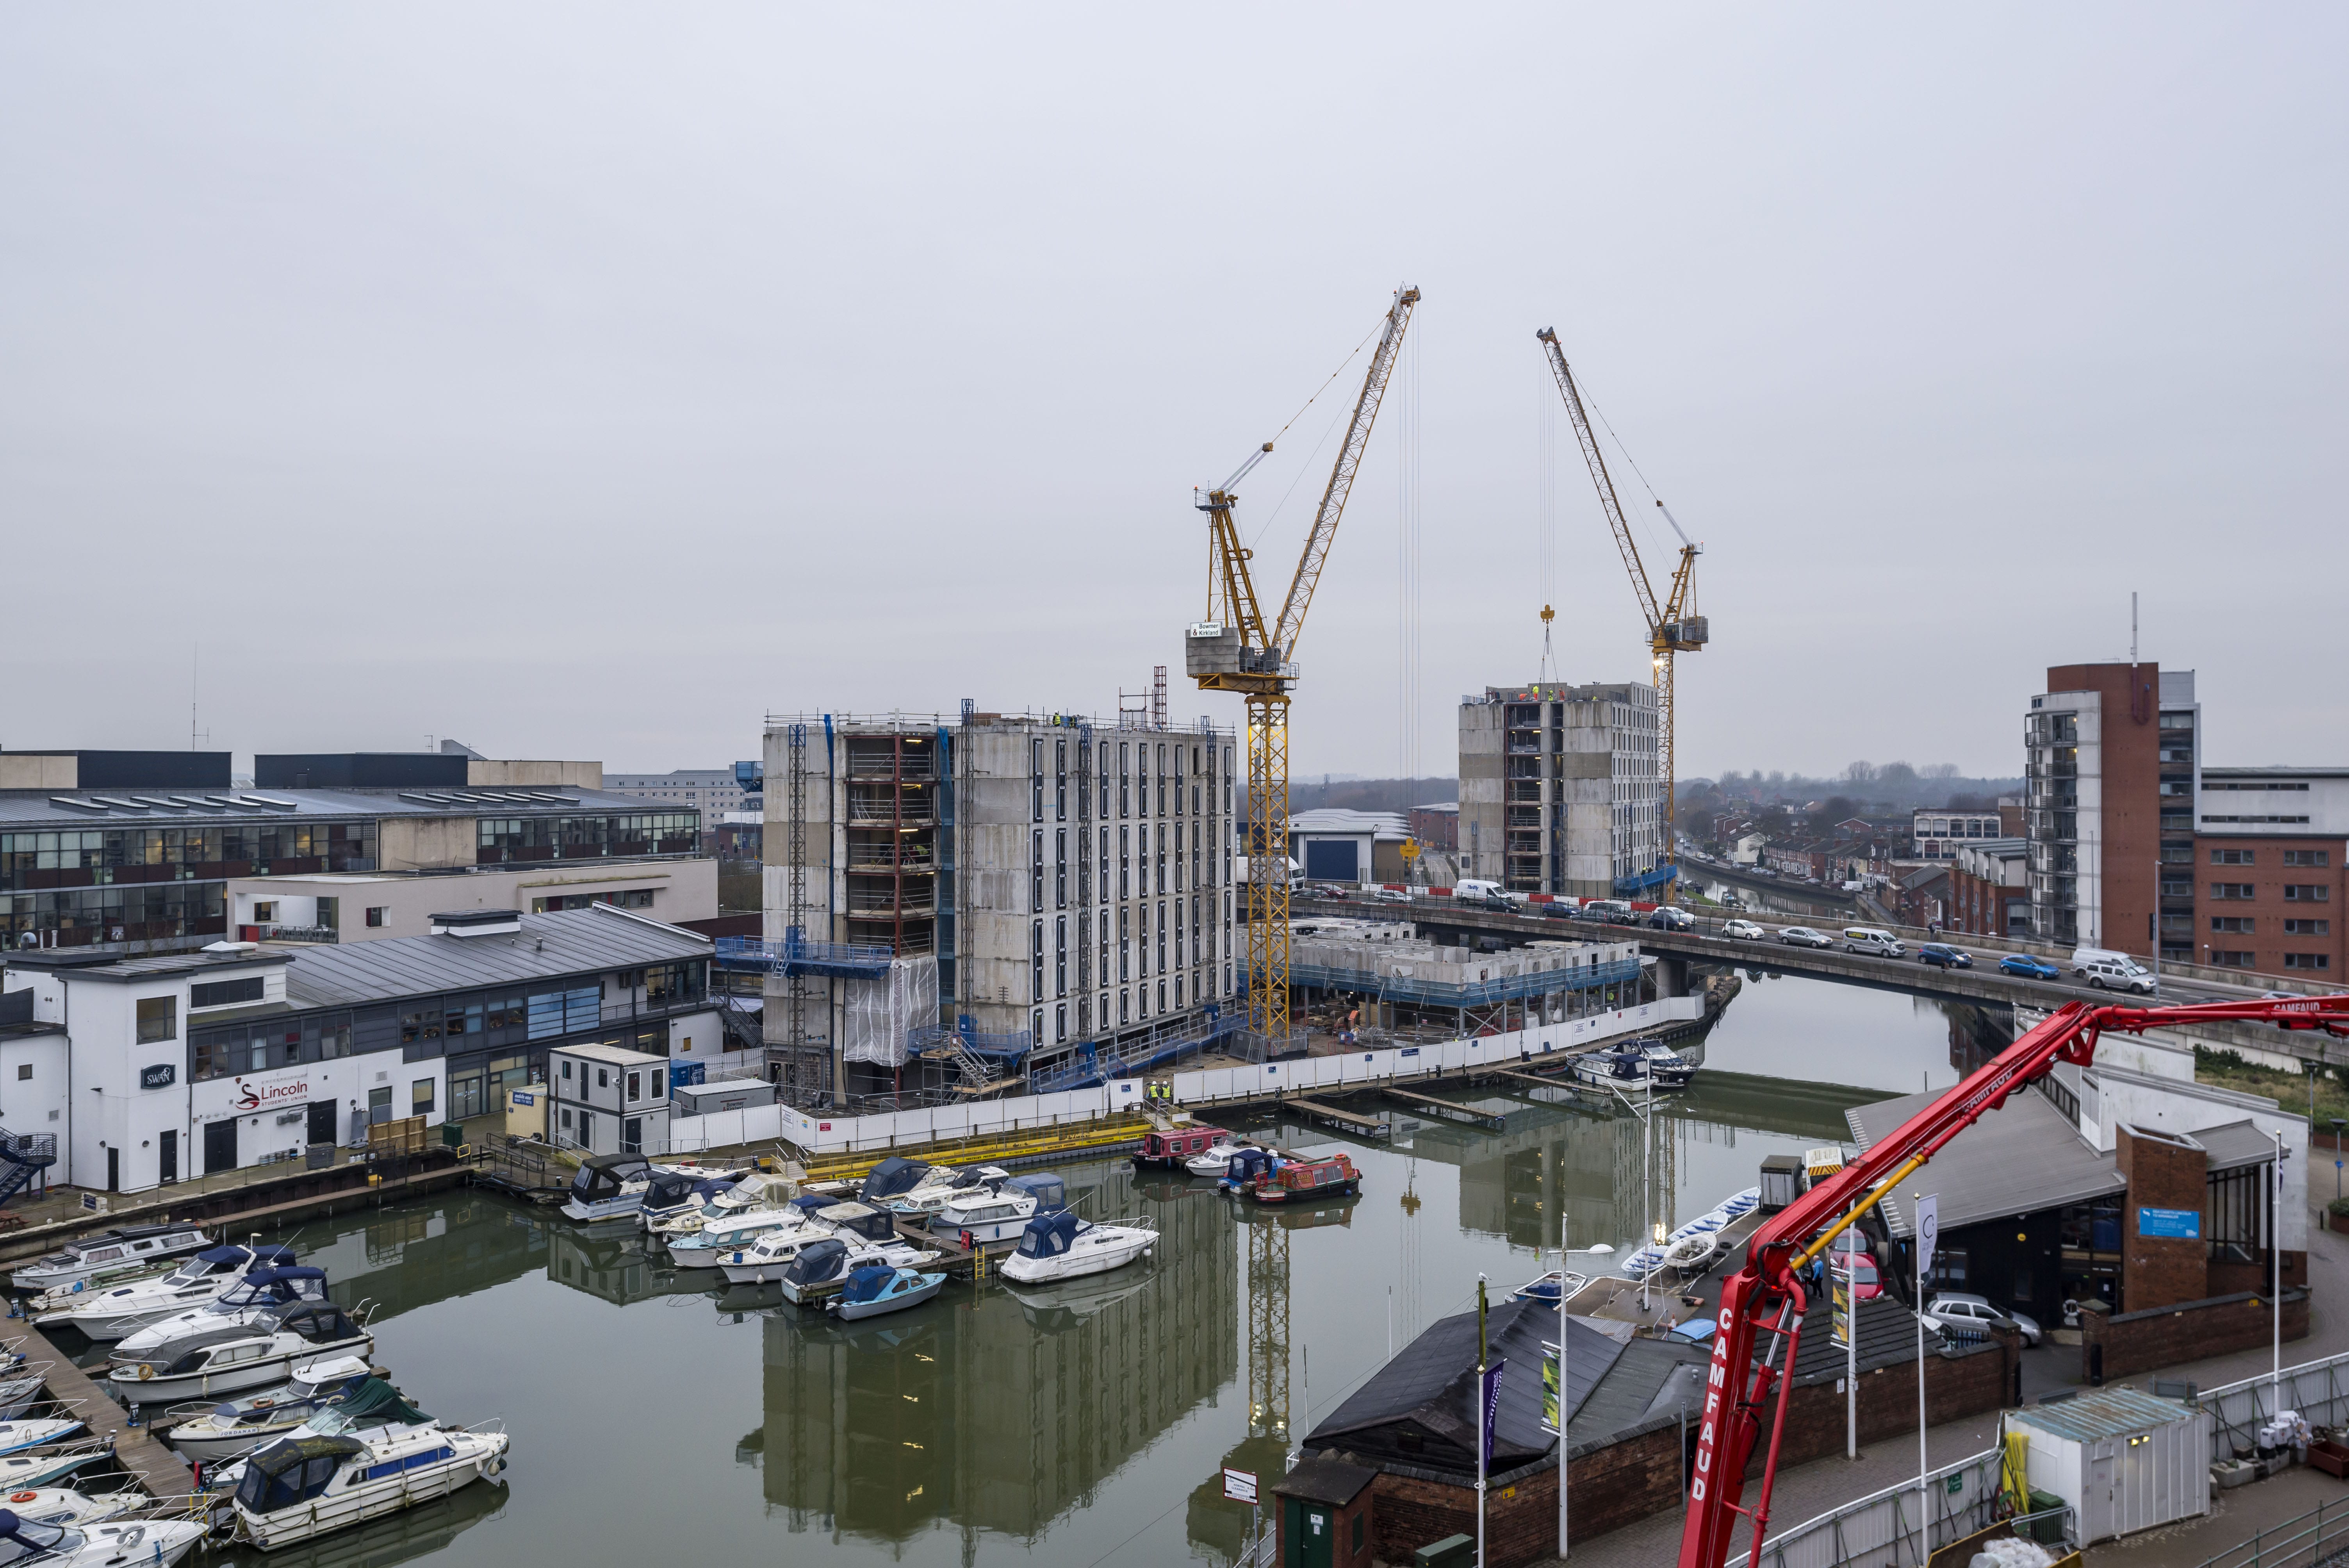 Image of the an accommodation block being built, two cranes work across a flyover